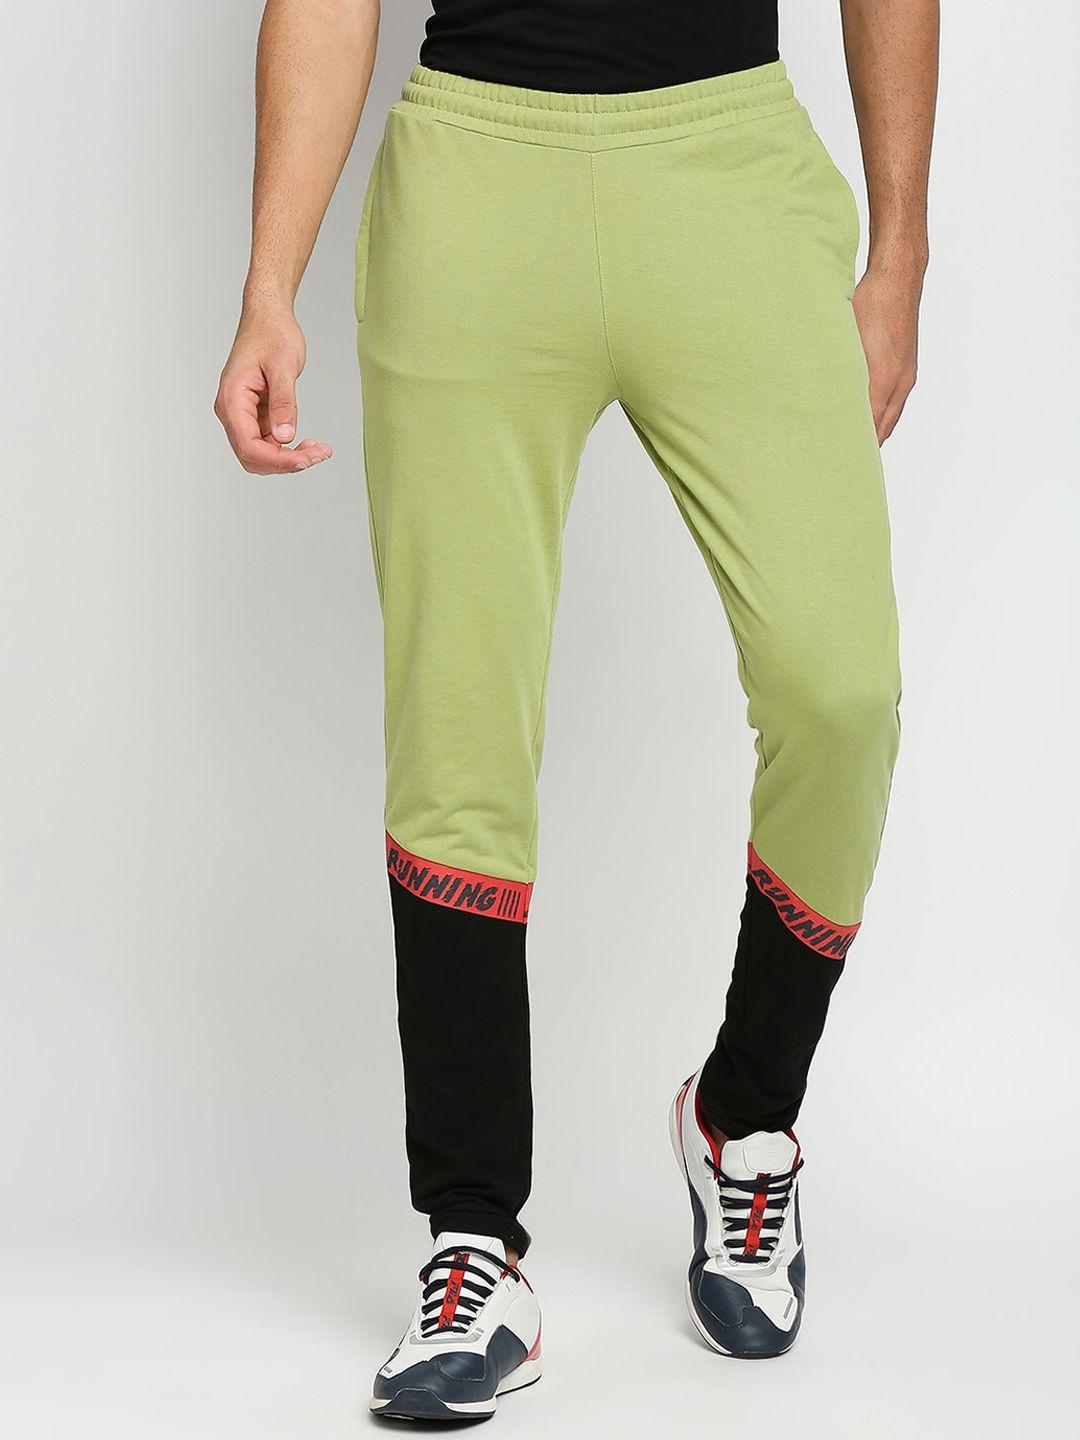 fitz-men-olive-green-and-black-colourblocked-solid-anti-odour-slim-fit-track-pant